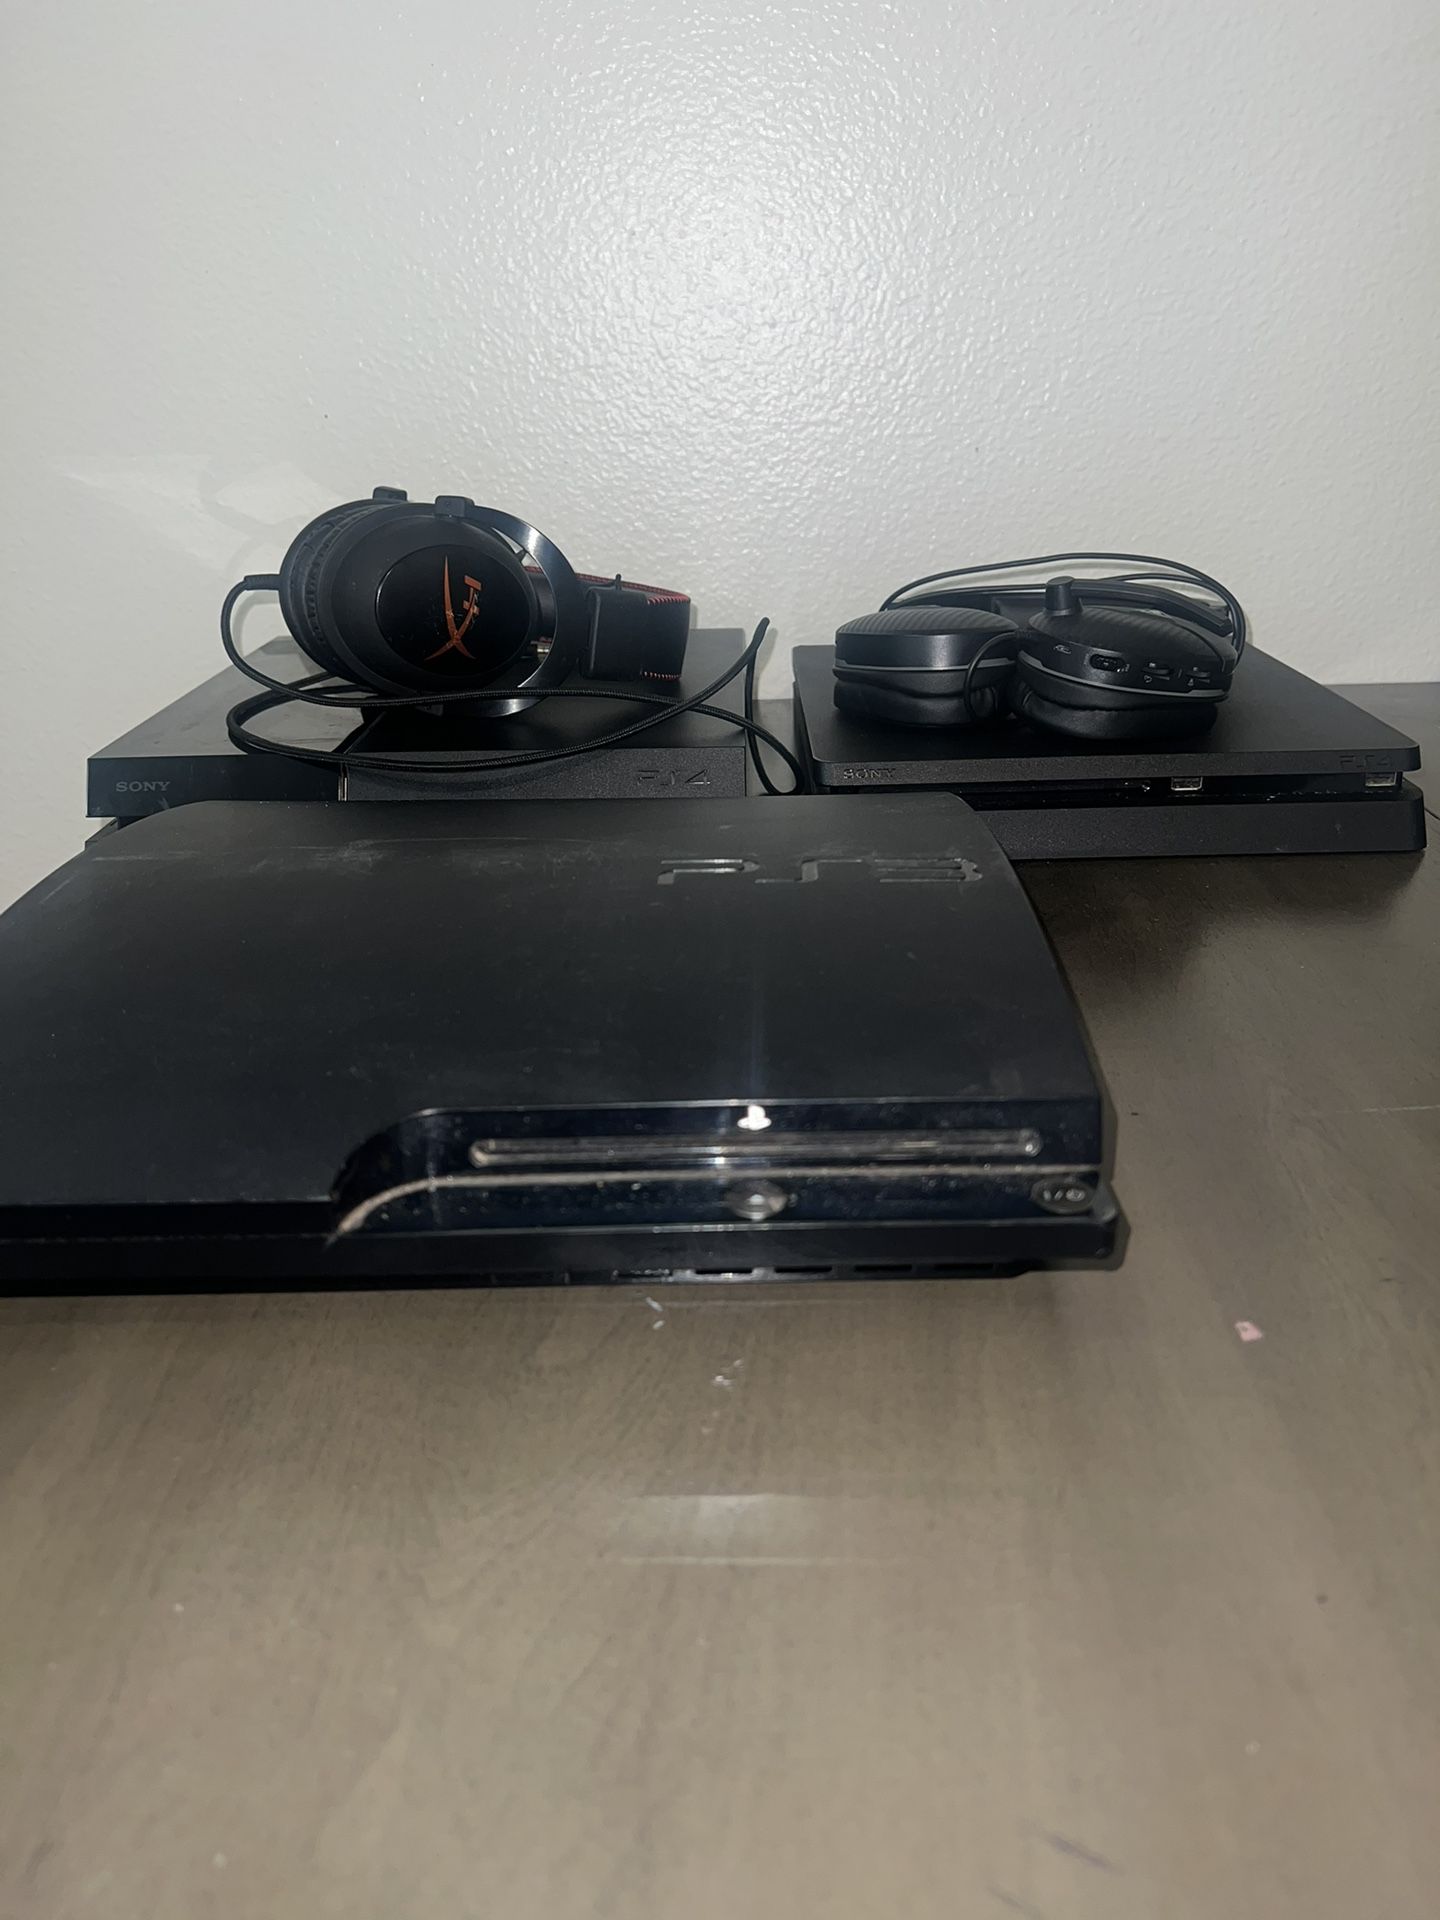 PlayStation 3 & 4 With Headphones